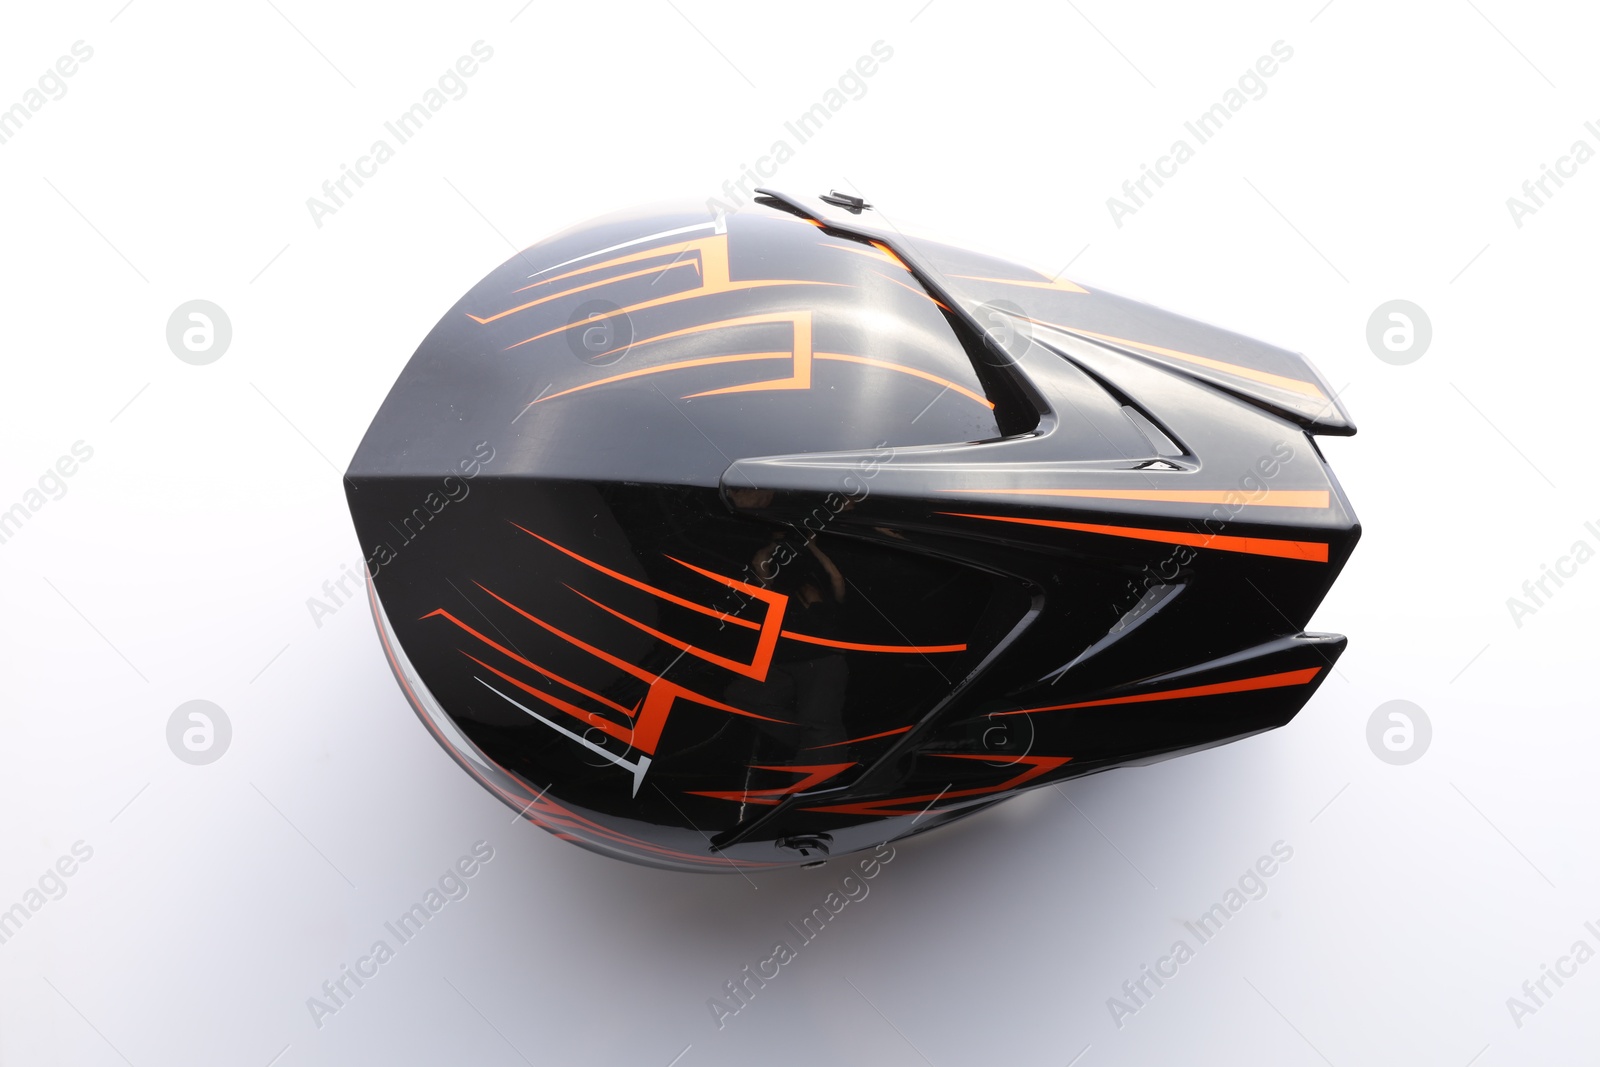 Photo of New stylish motorcycle helmet on white background, top view